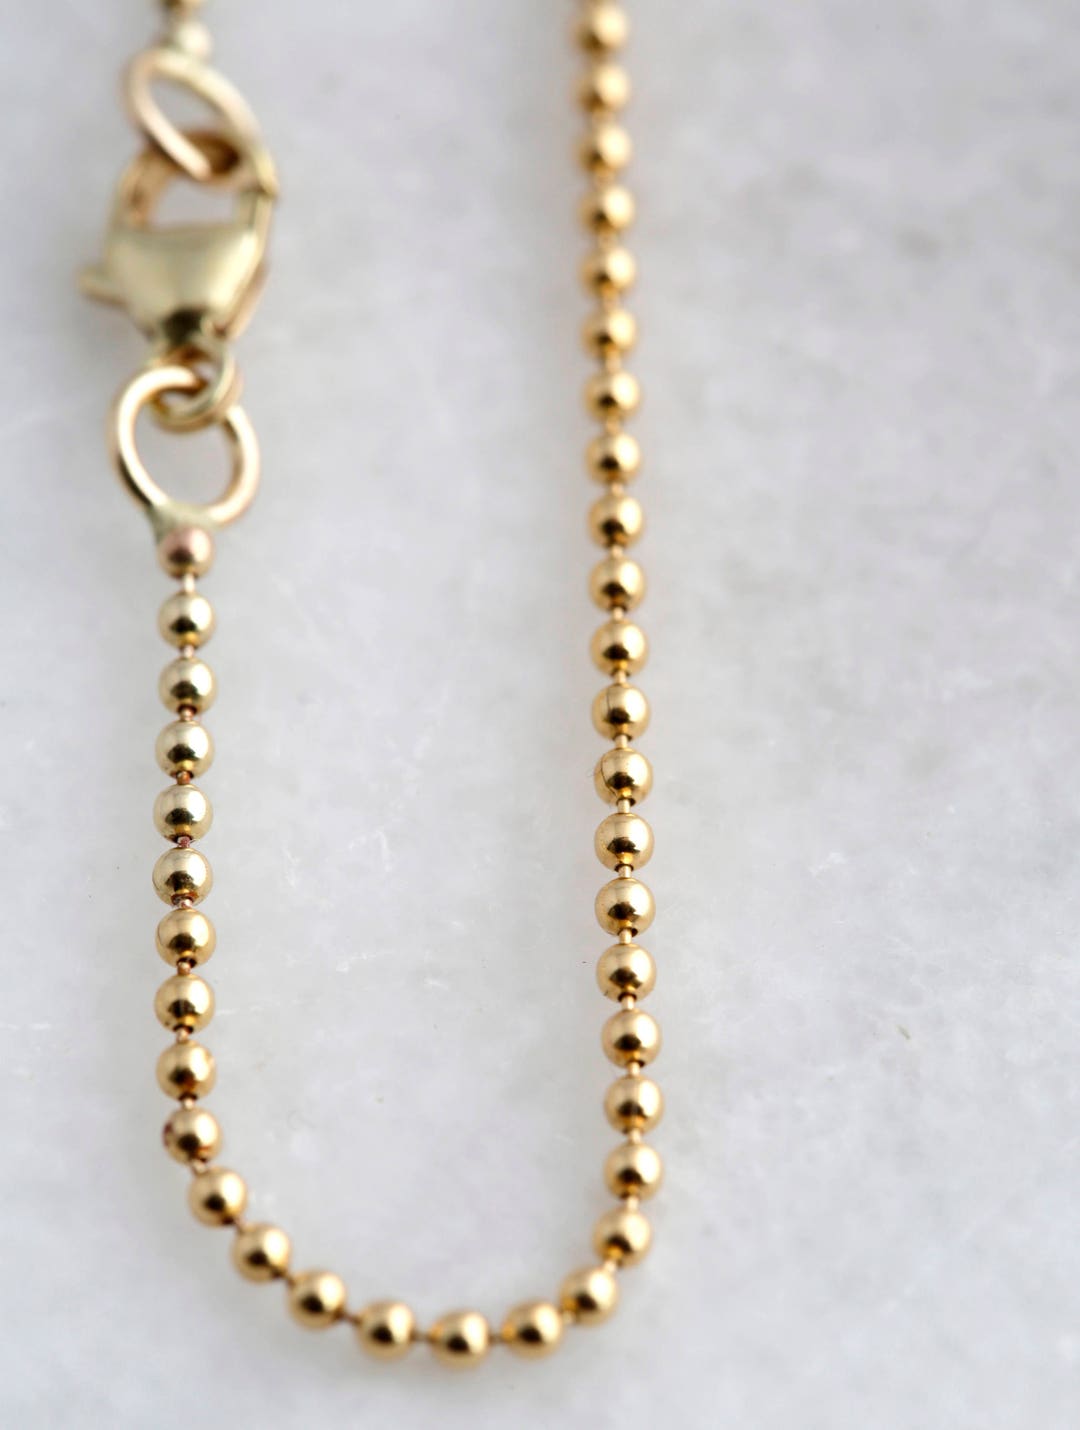 Is Tyrus Gold Necklace Real, Unique Emerald necklace, 18k Gold Vermeil  necklace, Gold necklace, Dainty necklace, Gemstone necklace, Chakra necklace,  Emerald, Gift (849) $ 62.